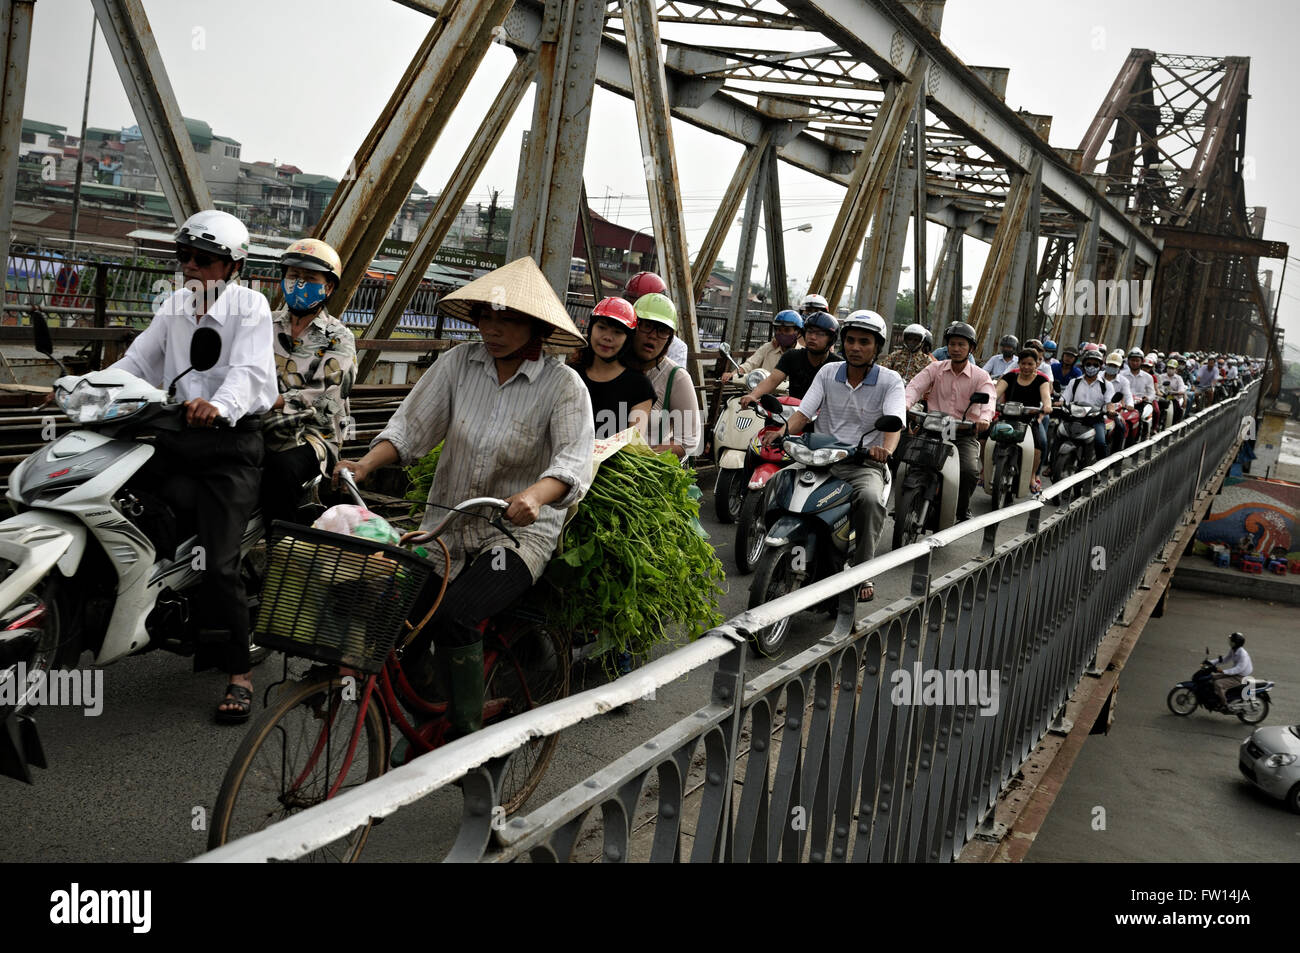 Woman riding a bicycle and many other people riding scooters on Long Bien bridge during rush hour in Hanoi, Vietnam Stock Photo